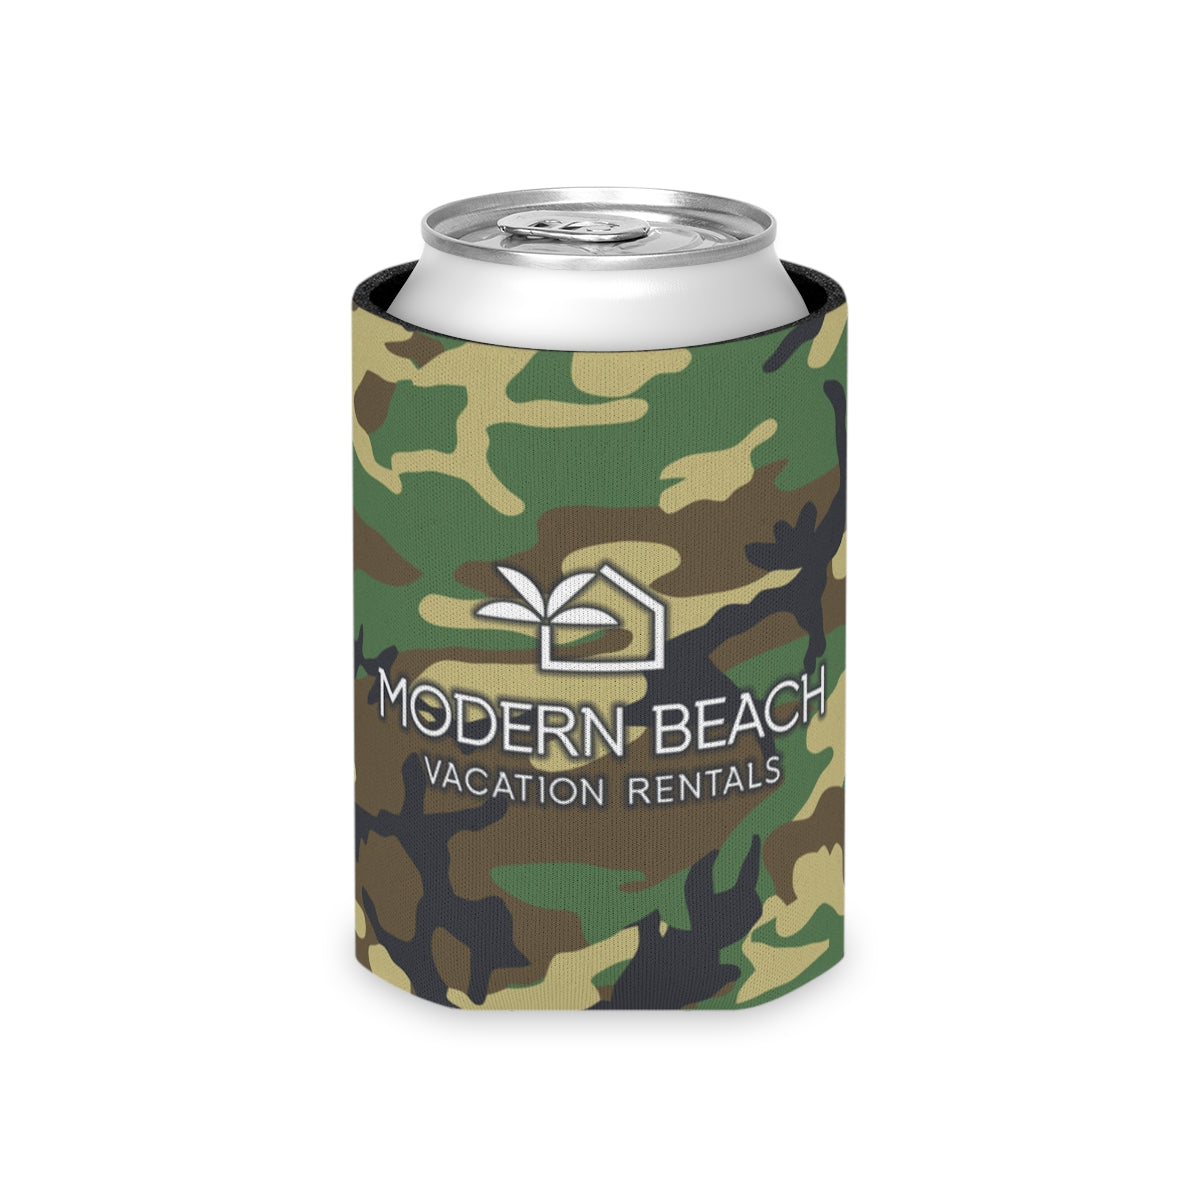 Modern Beach Vacation Rentals Basic Logo White Letters Camouflage BDU Can Coozie Cooler